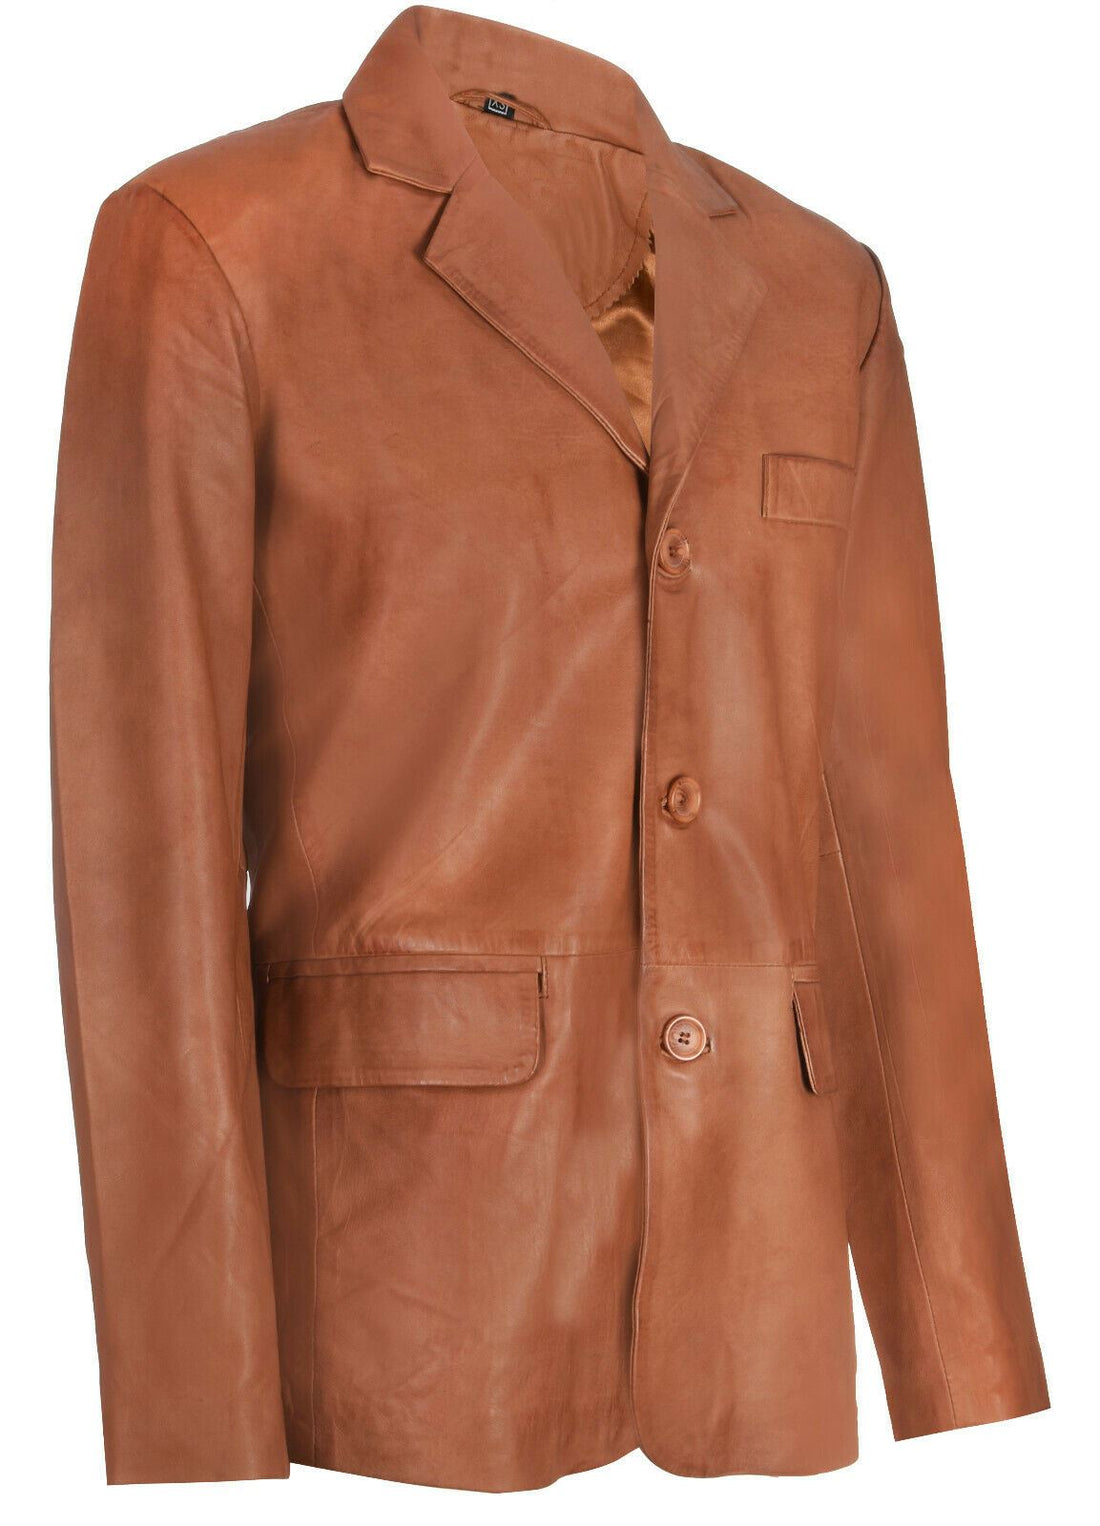 Mens Leather Classic 3 Button Blazer Jacket-Dudley